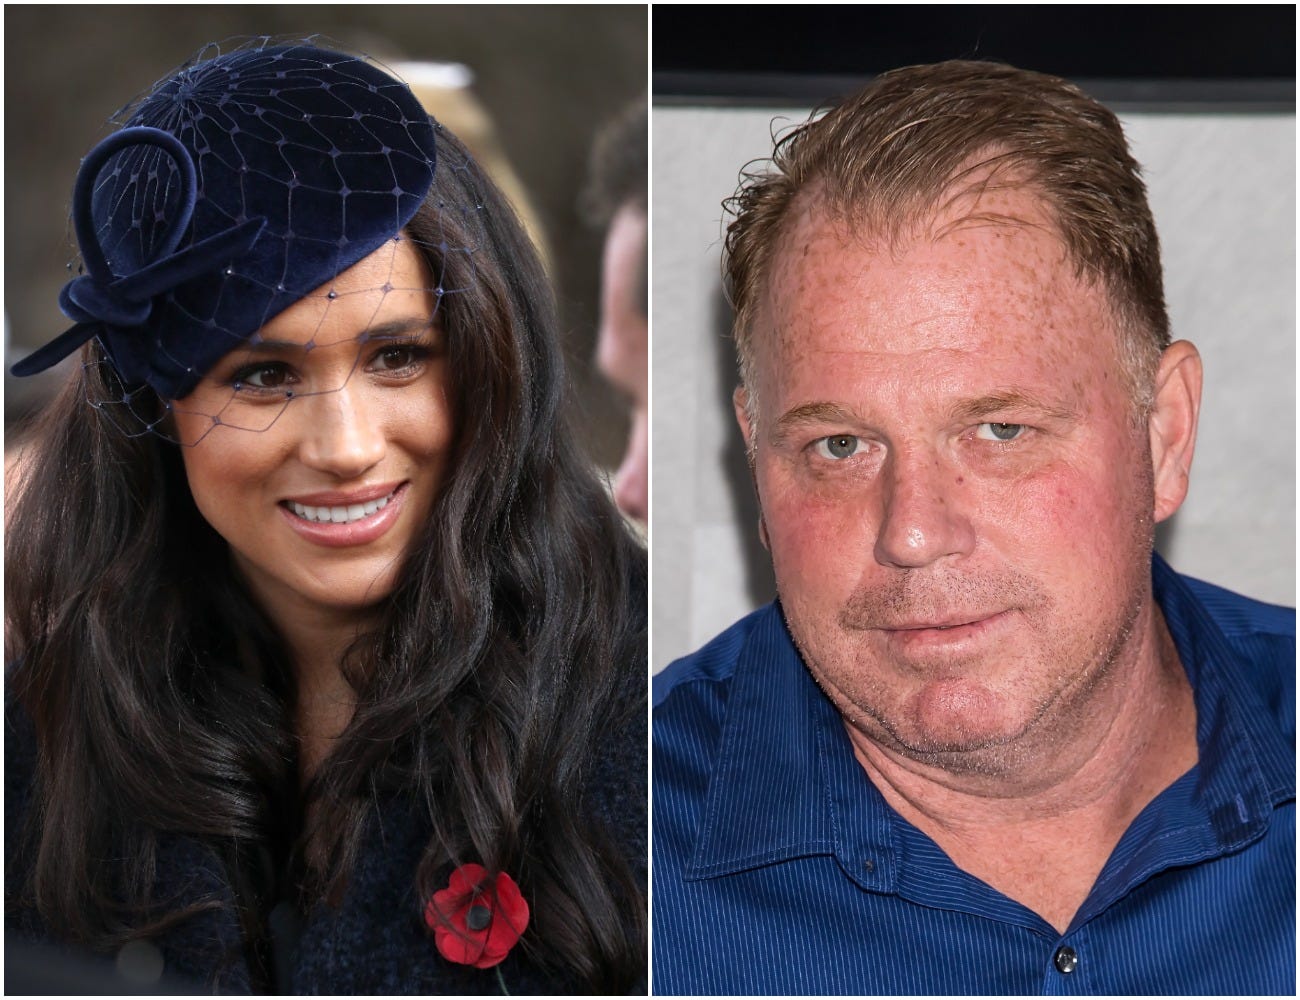 A side by side of Meghan Markle, left, and her half-brother Thomas Markle Jr., right.